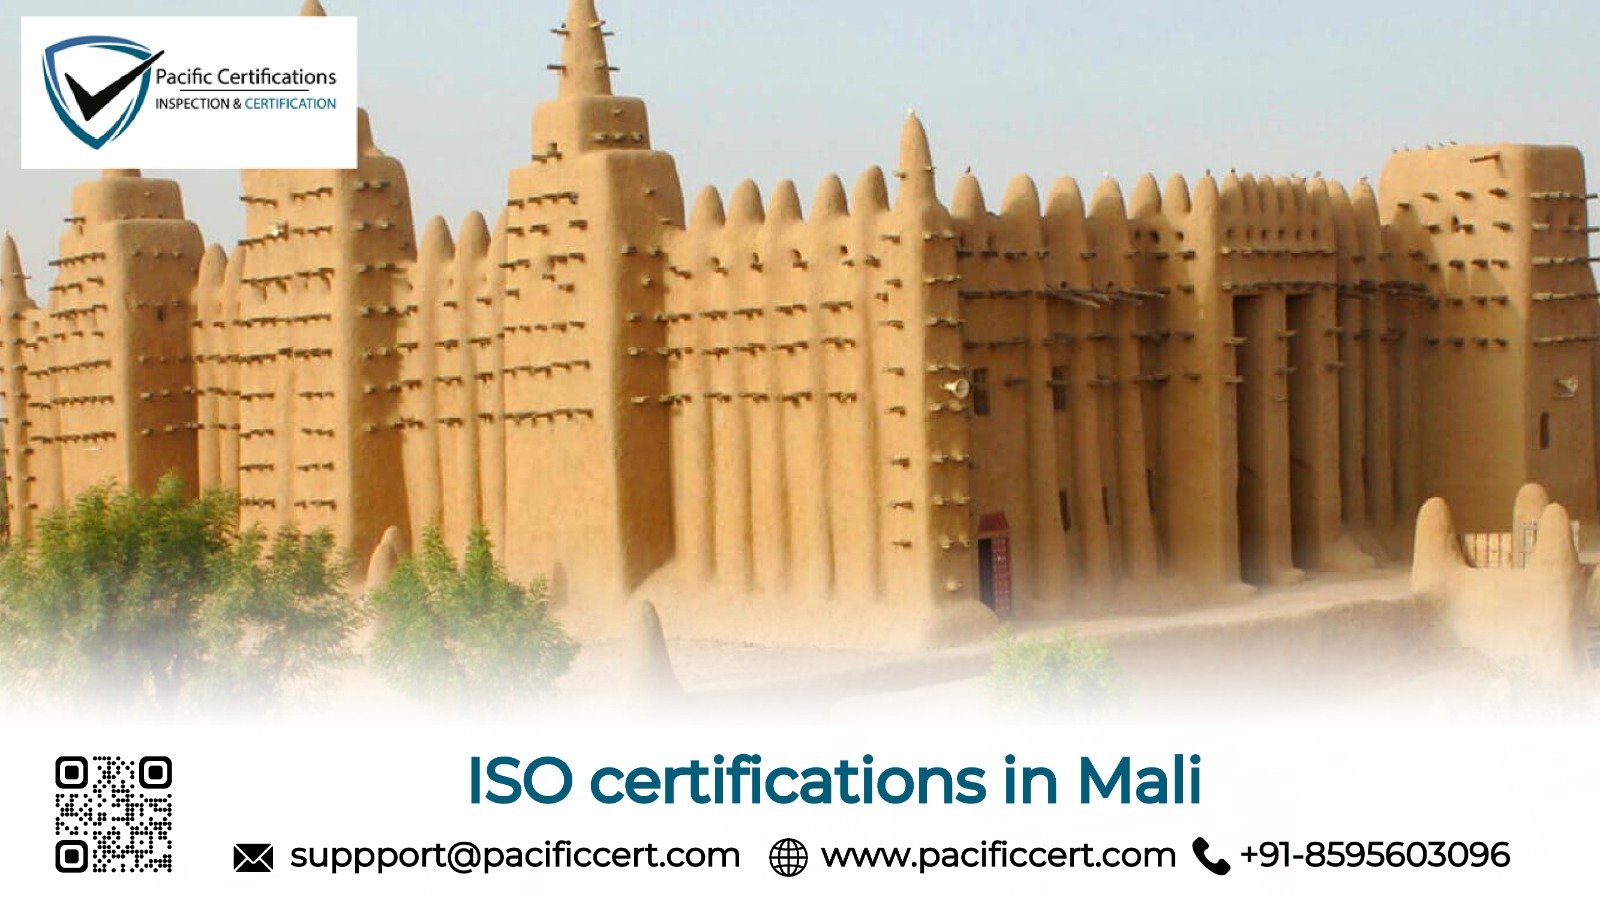 ISO Certifications in Mali and How Pacific Certifications can help | Pacific Certifications